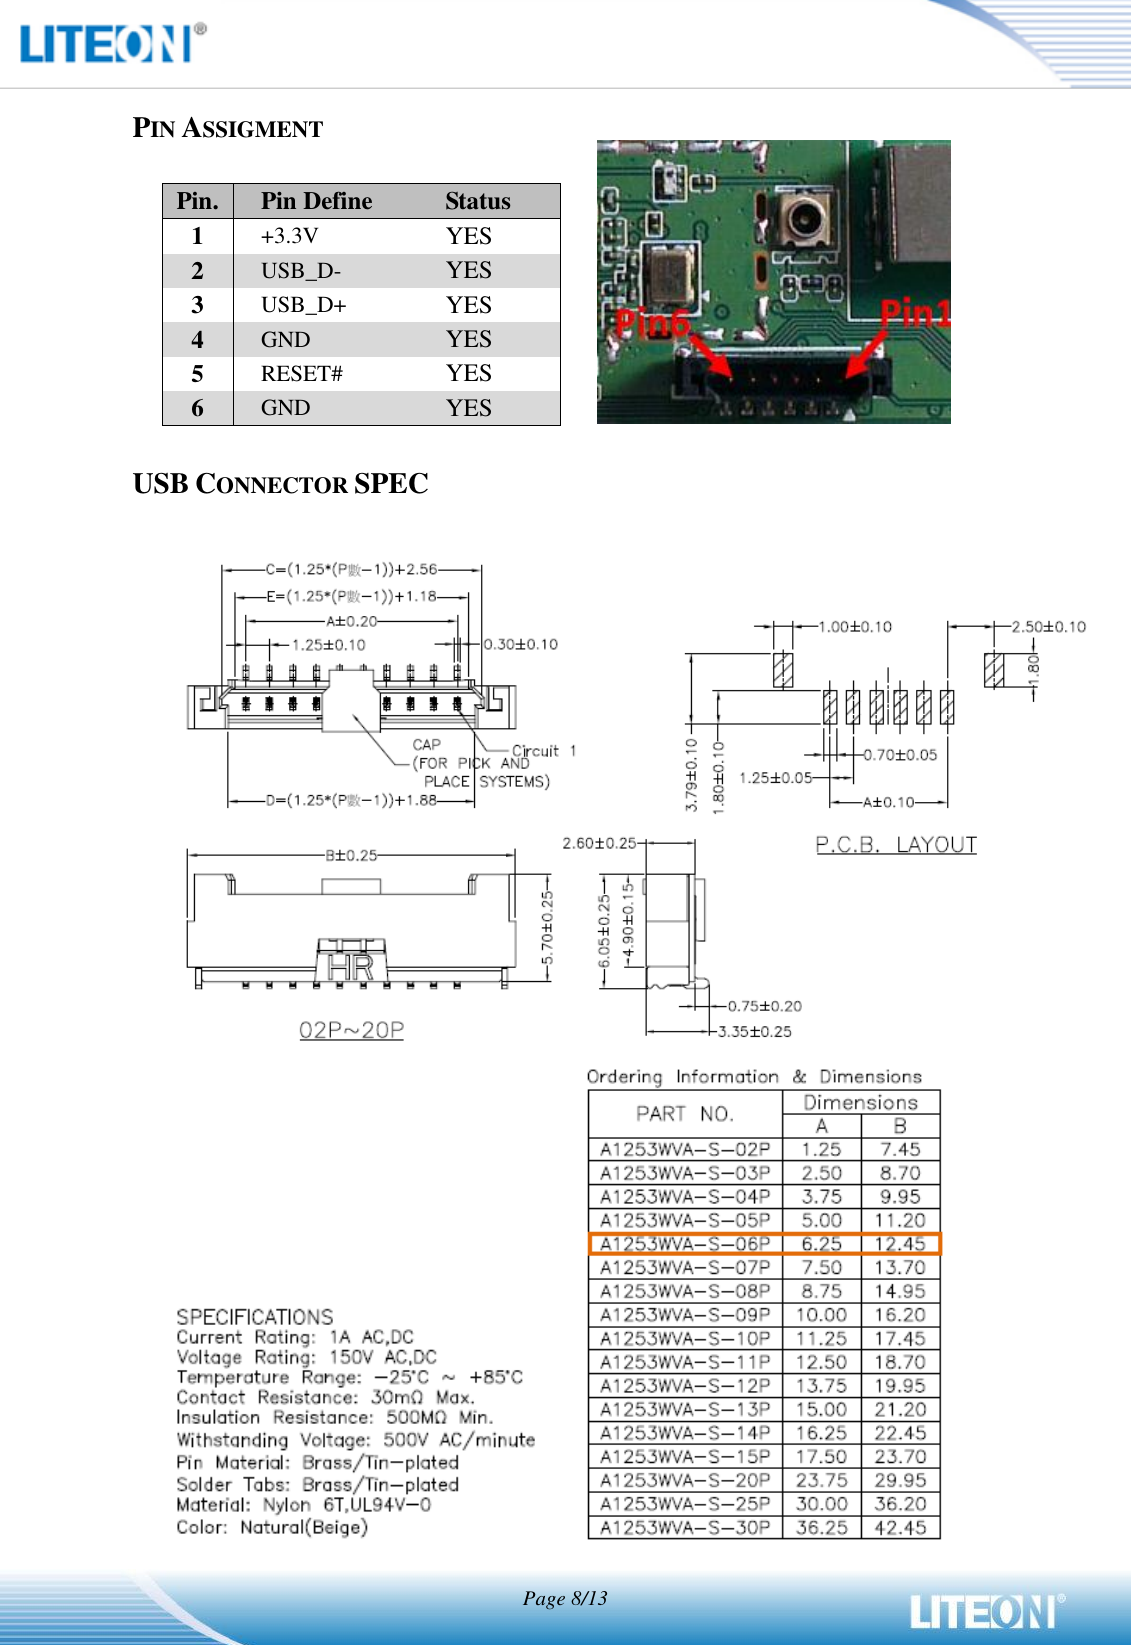   Page 8/13   PIN ASSIGMENT  Pin. Pin Define Status 1 +3.3V YES 2 USB_D- YES 3 USB_D+ YES 4 GND YES 5 RESET# YES 6 GND YES    USB CONNECTOR SPEC       